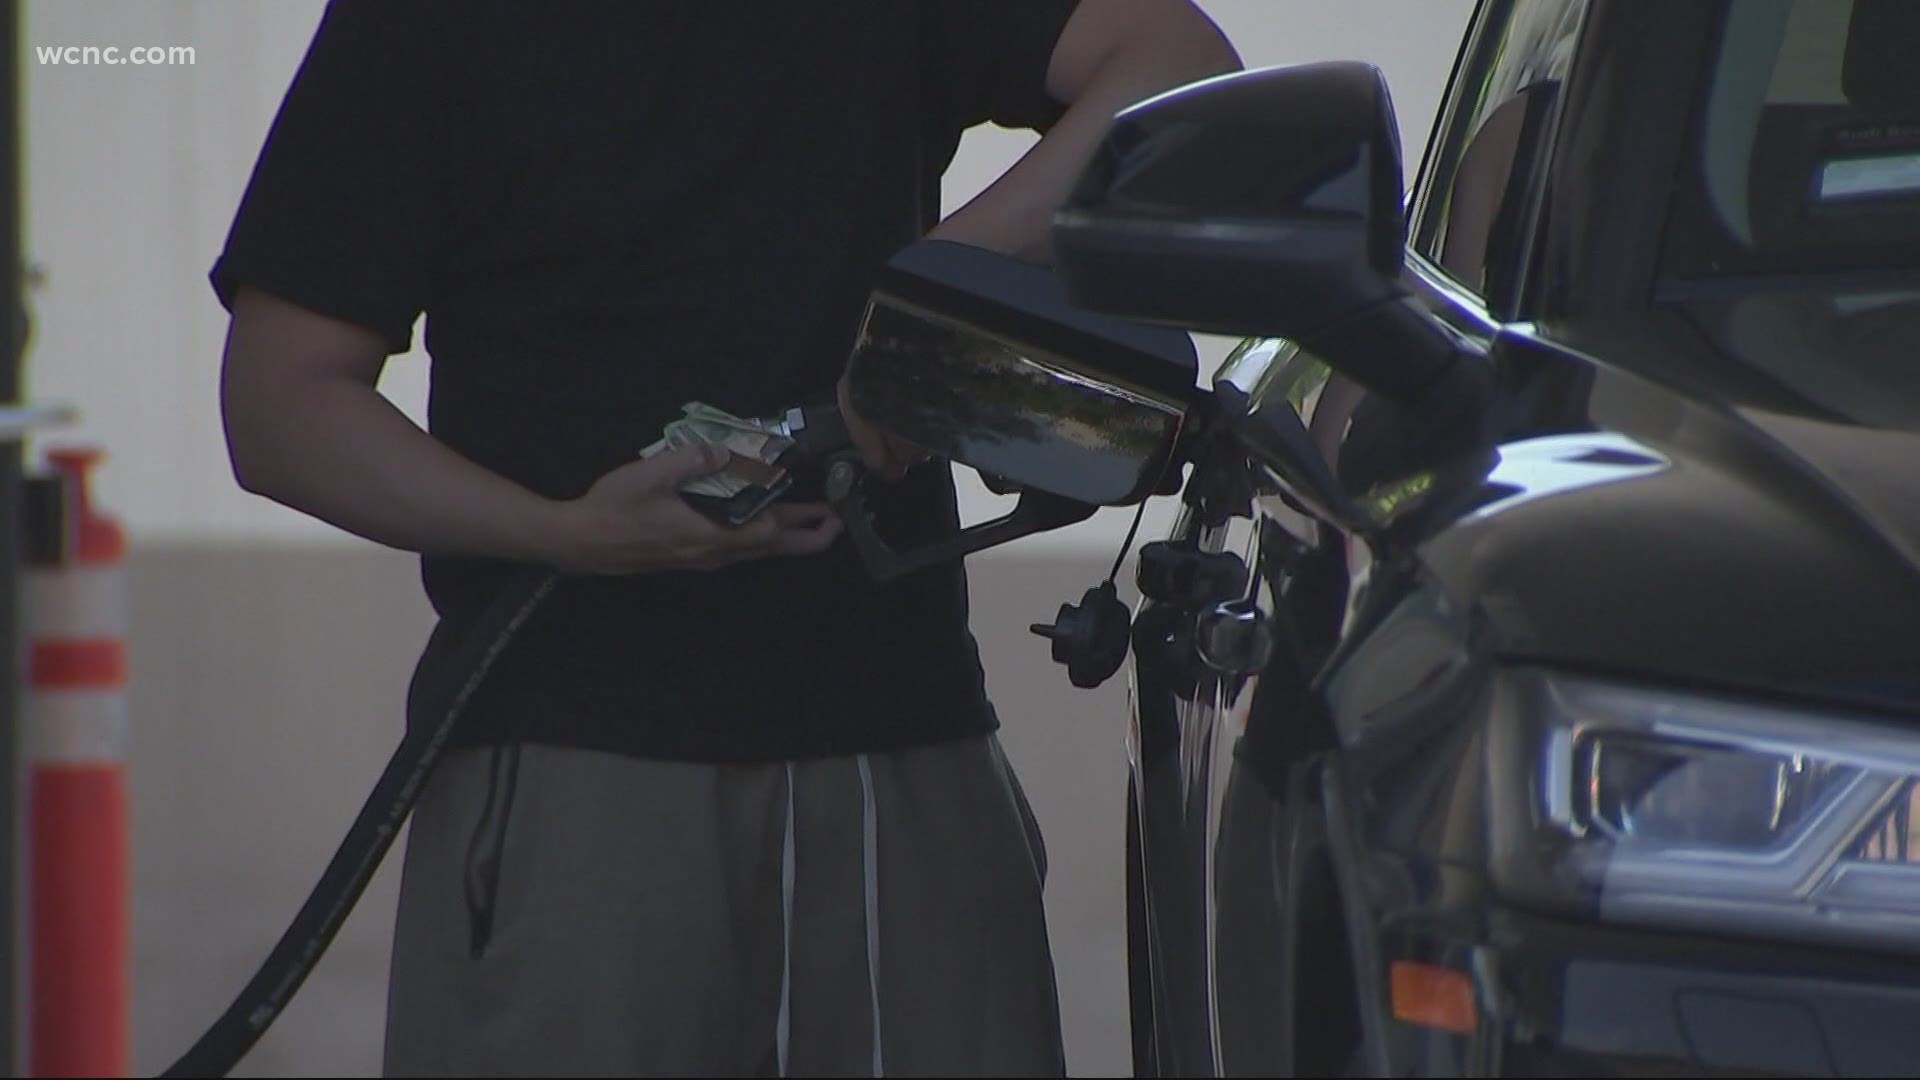 In Charlotte, the average gas price is a nickel higher than last week and about seven cents more expensive than this same time last year.